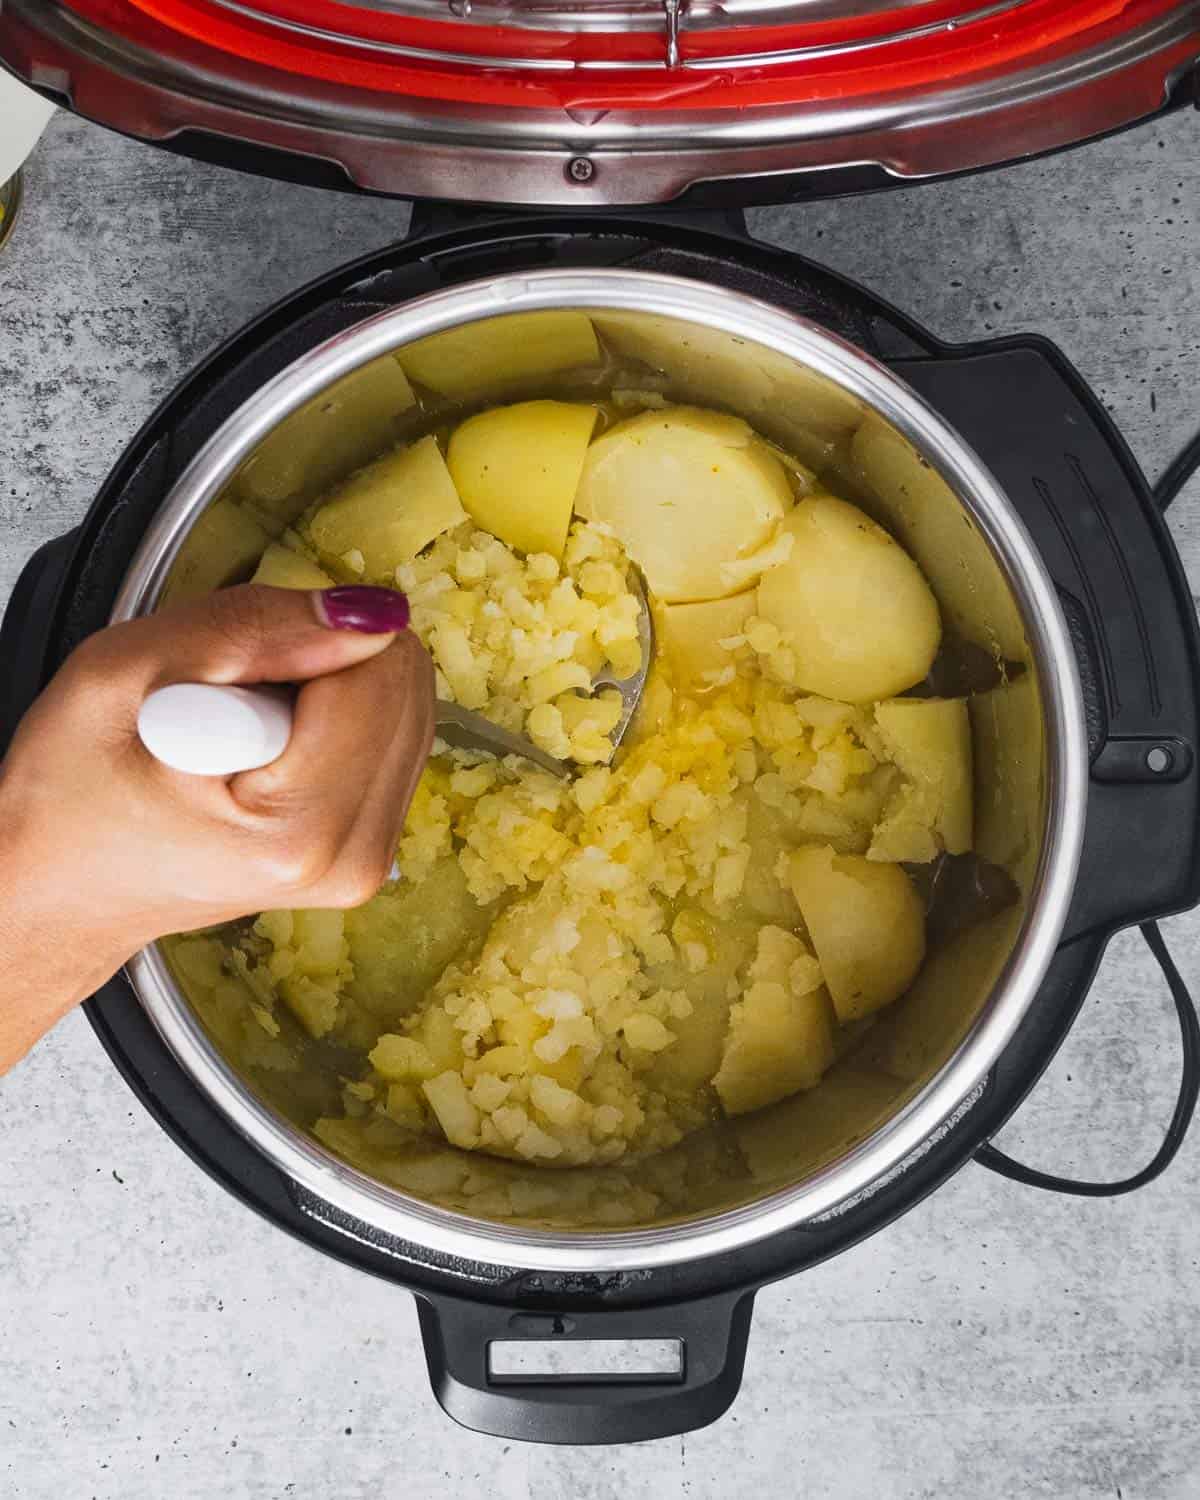 Mashing cooked russet potatoes inside an Instant Pot.